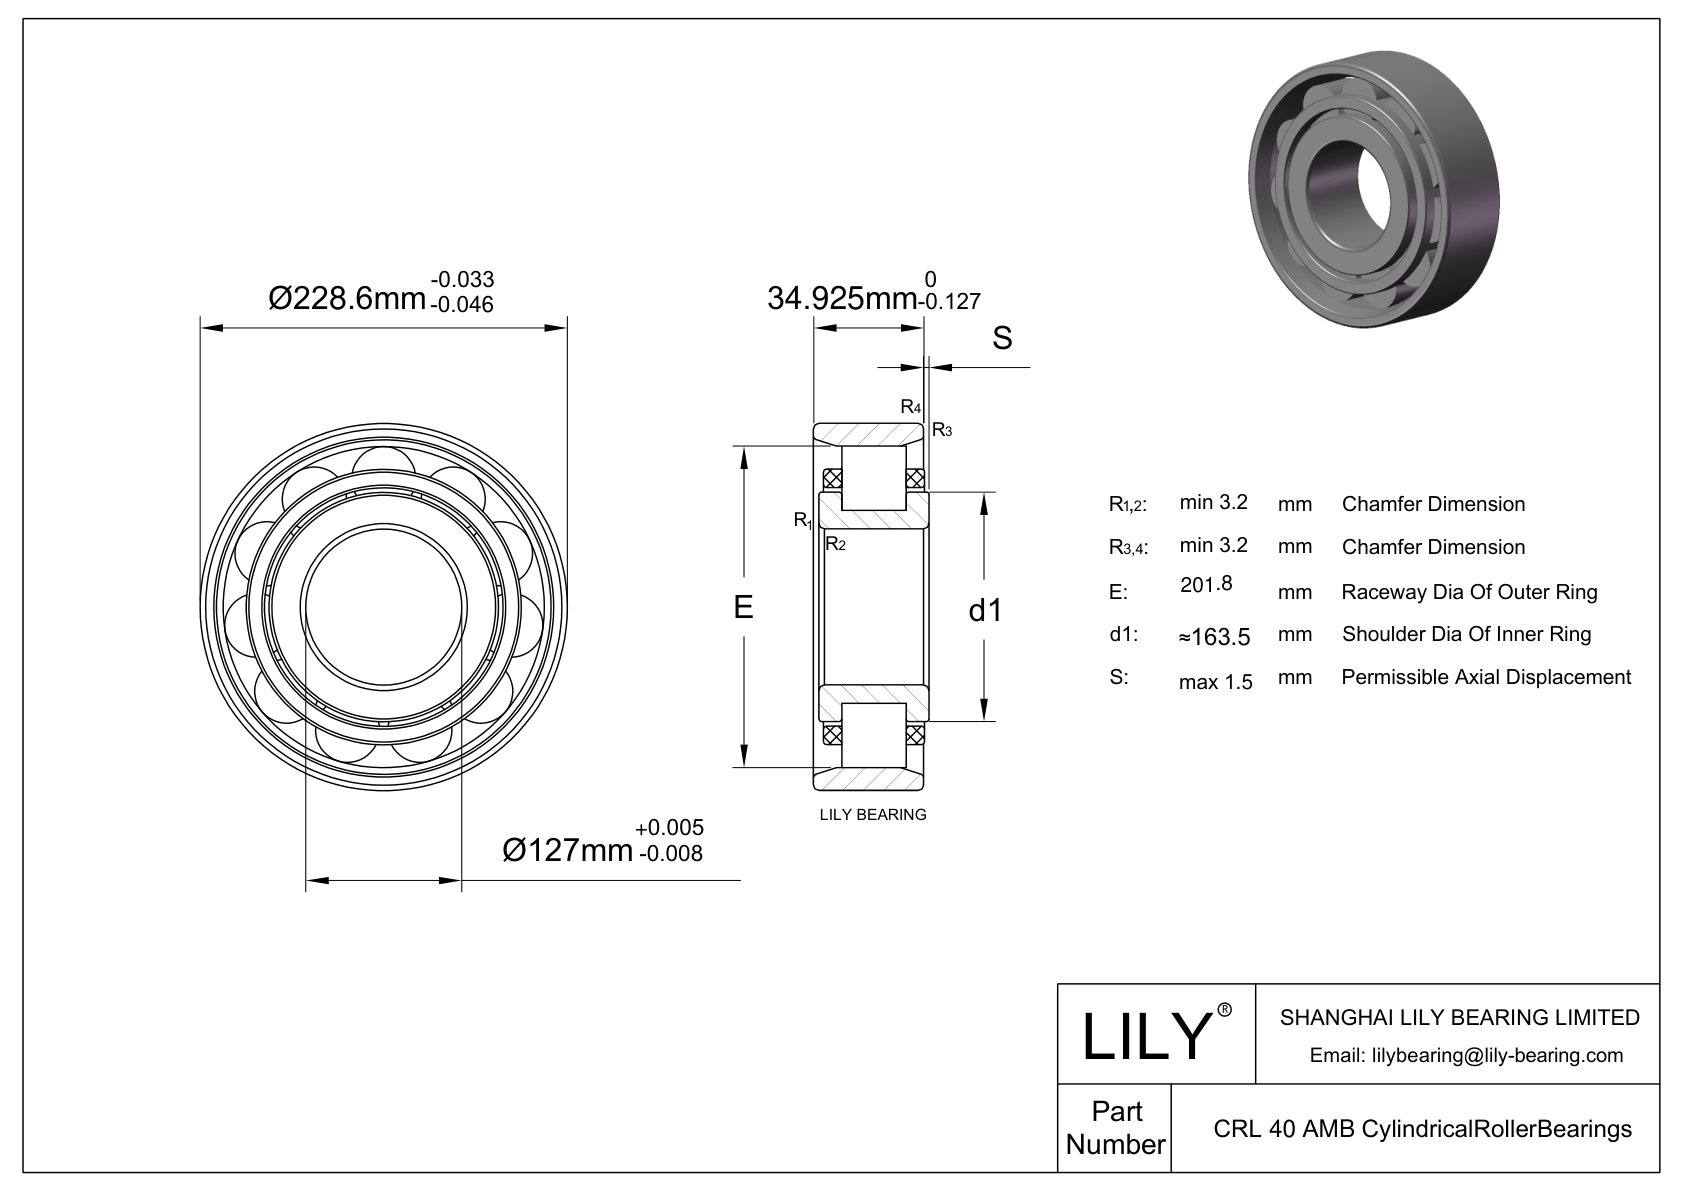 CRL 40 AMB Single Row Cylindrical Roller Bearings With Inner Ring cad drawing